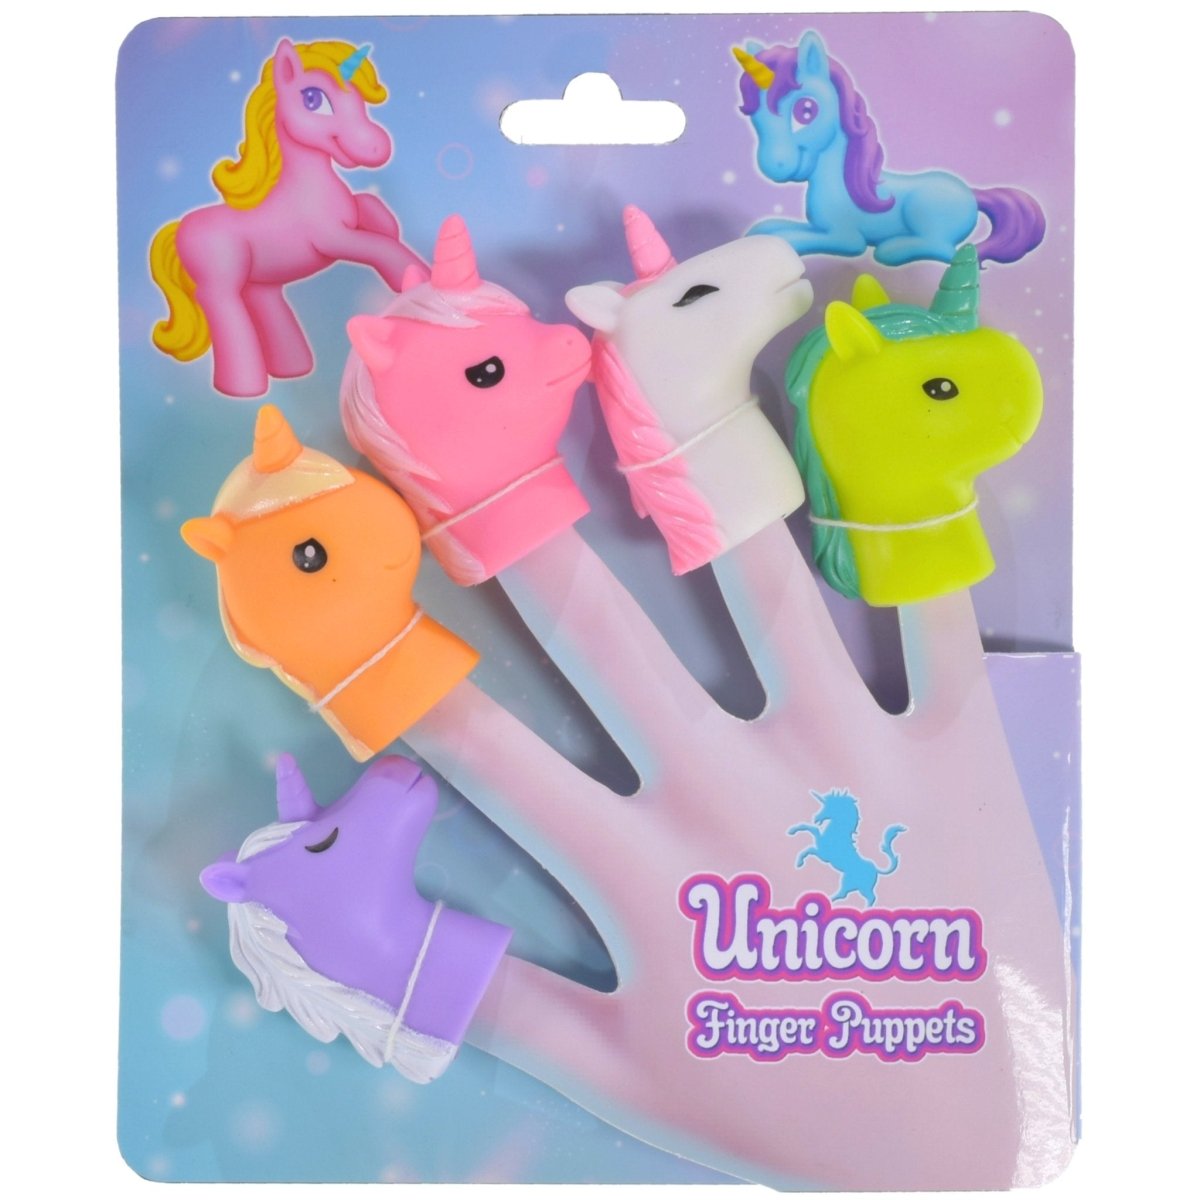 Unicorn Finger Puppets - Kids Party Craft